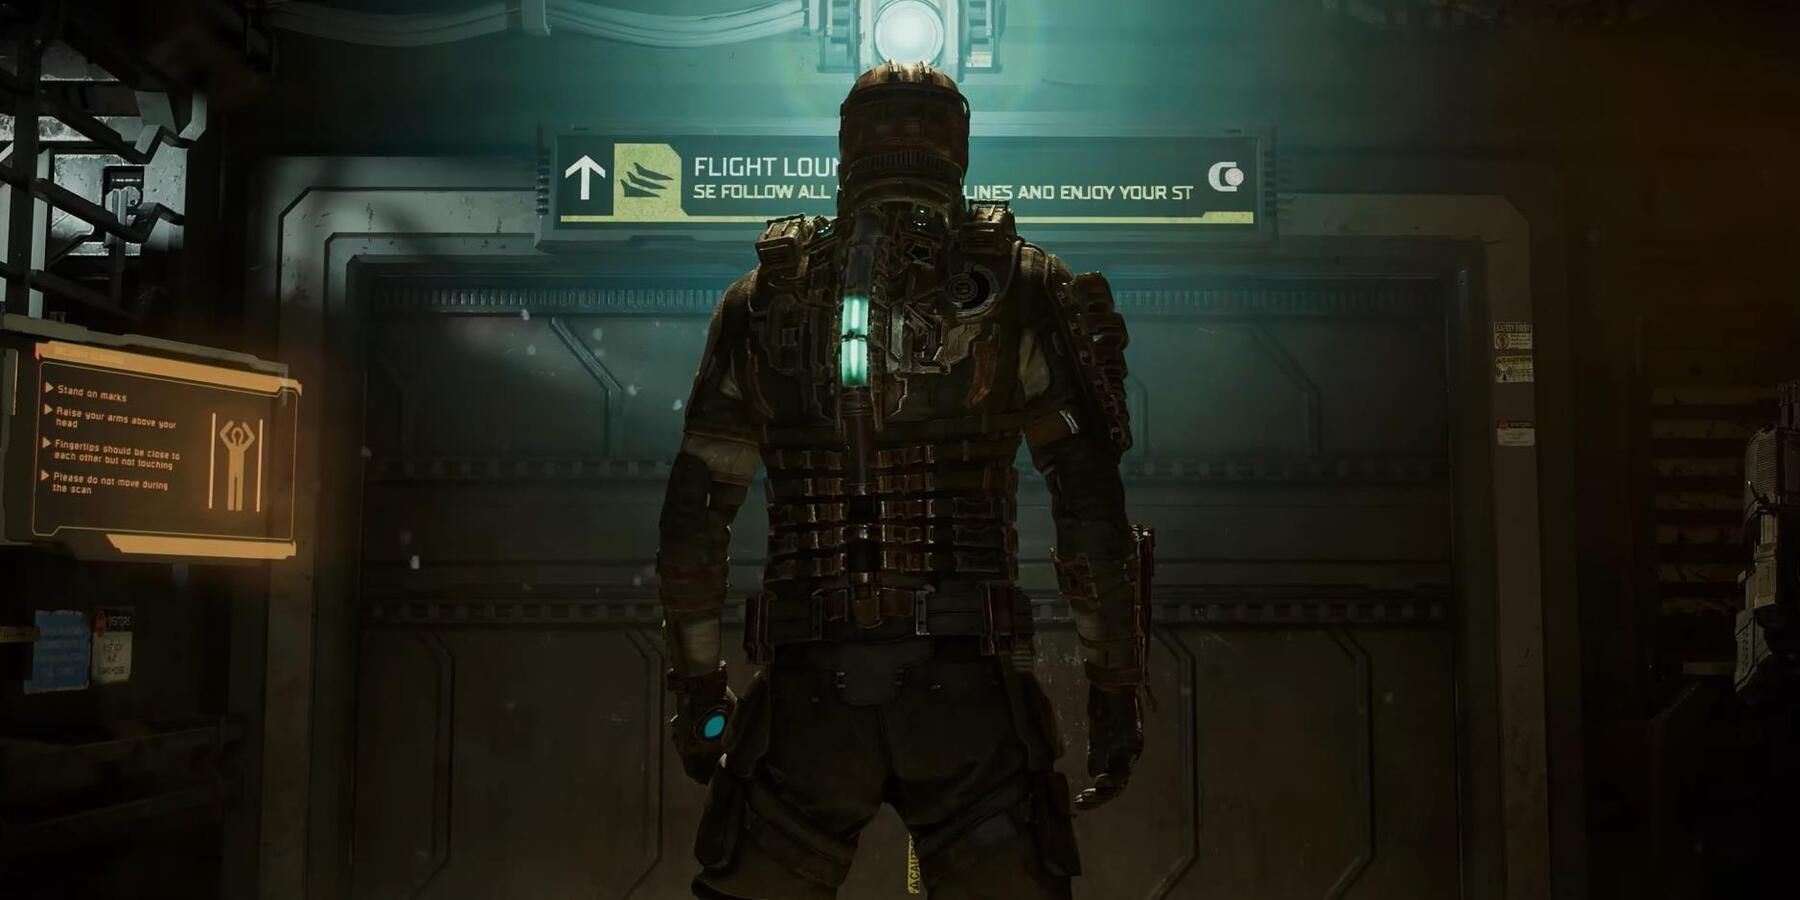 Isaac is back in Dead Space